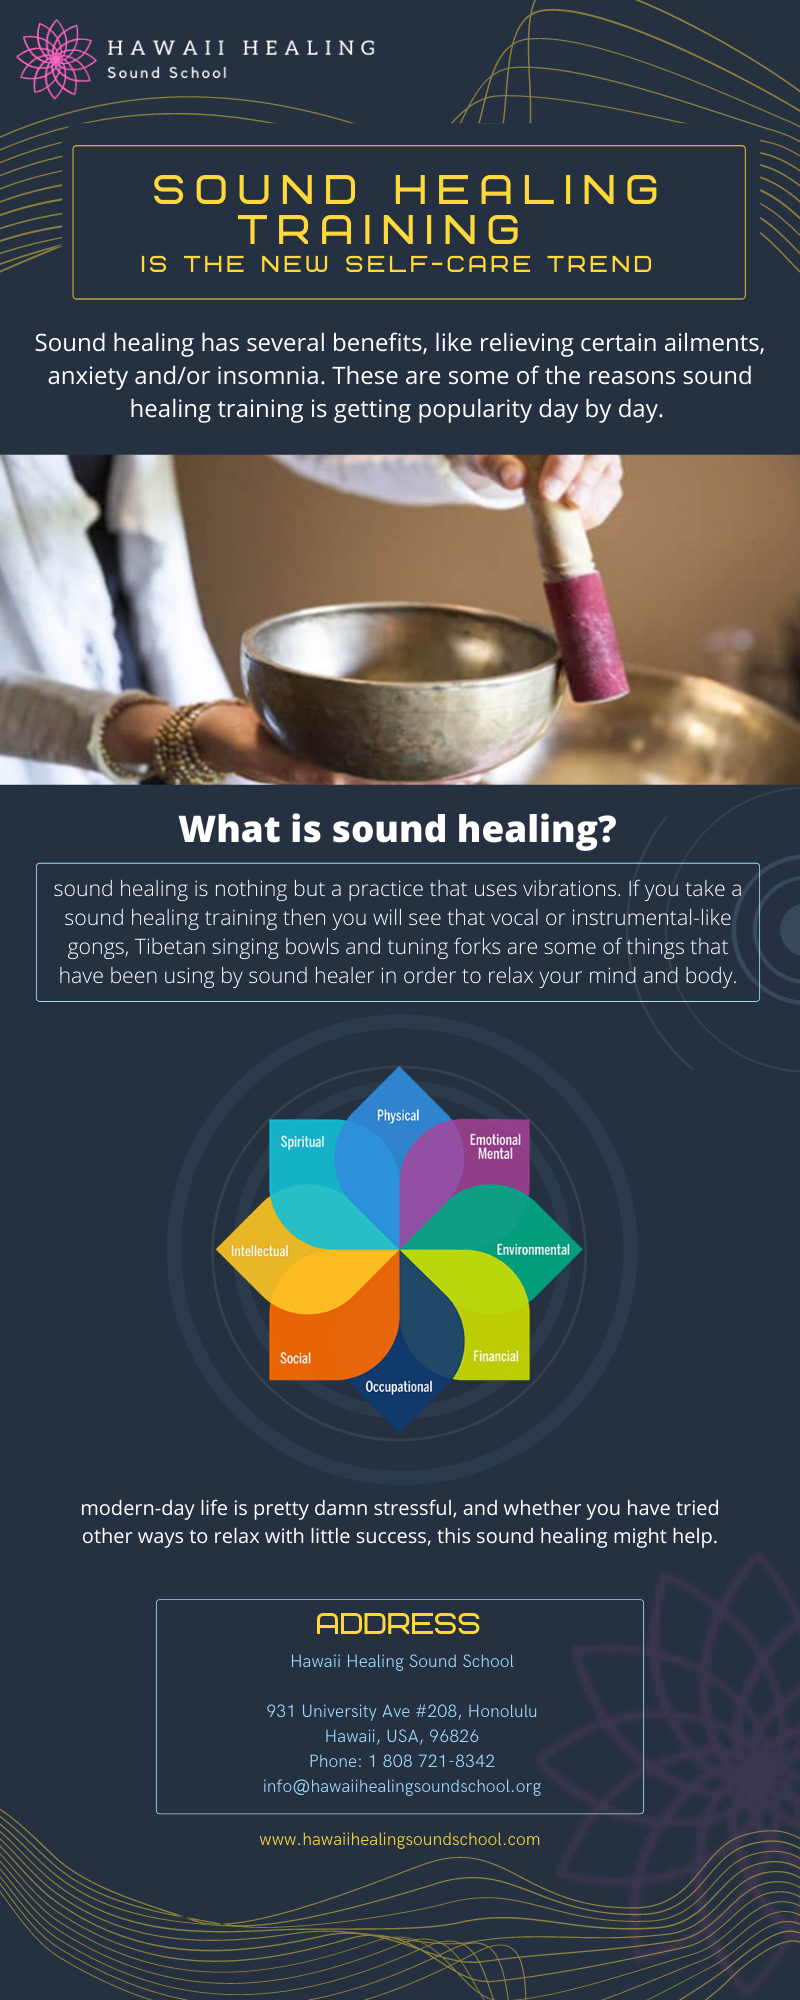 Sound Healing Training Is the New Self-Care Trend You Should Know Sound healing has several benefits, like relieving certain ailments, anxiety and/or insomnia. These are some of the reasons sound healing training is getting popularity day by day. For more details, visit: https://bit.ly/3dlVloj
 by hawaiihealingusa